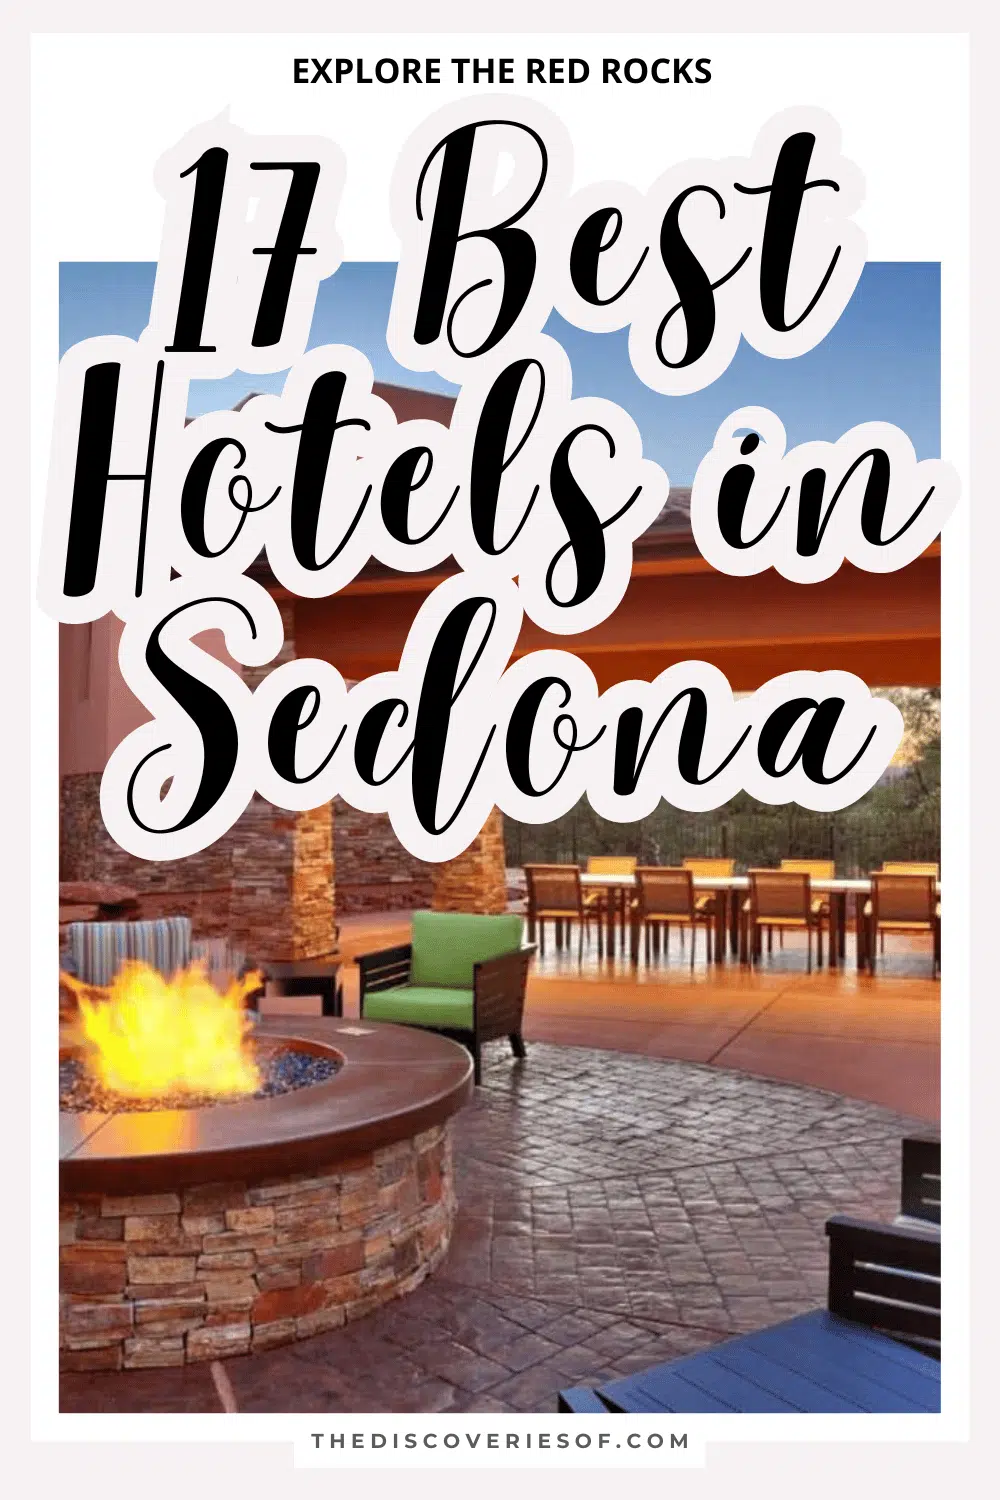 17 Best Hotels in Sedona: Explore the Red Rocks